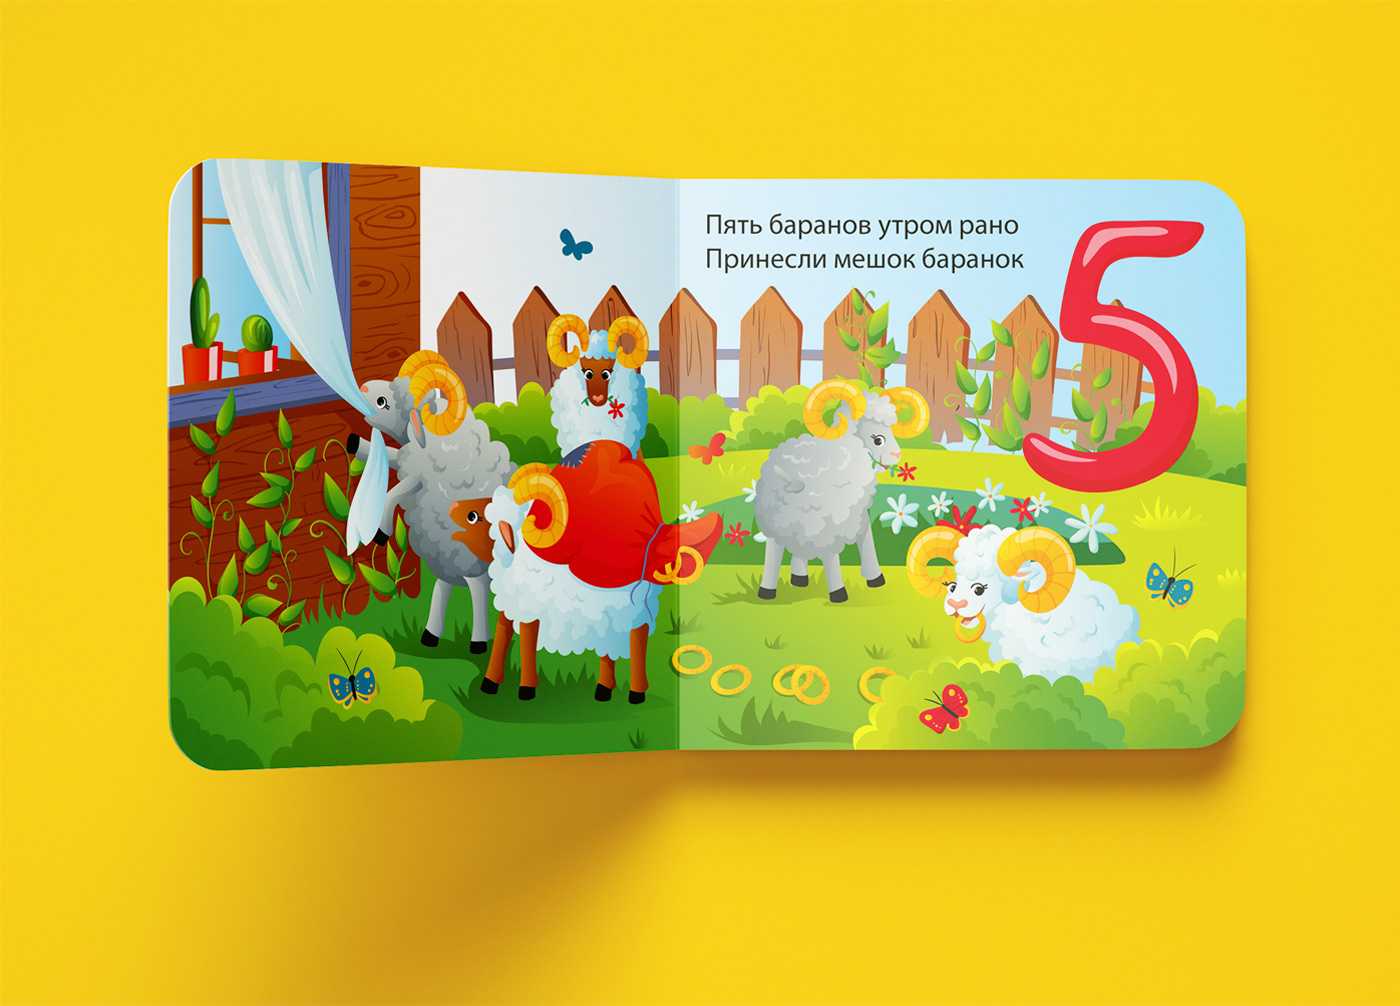 A non-profit concept  for an educational children's picture book.
Teaching children to count